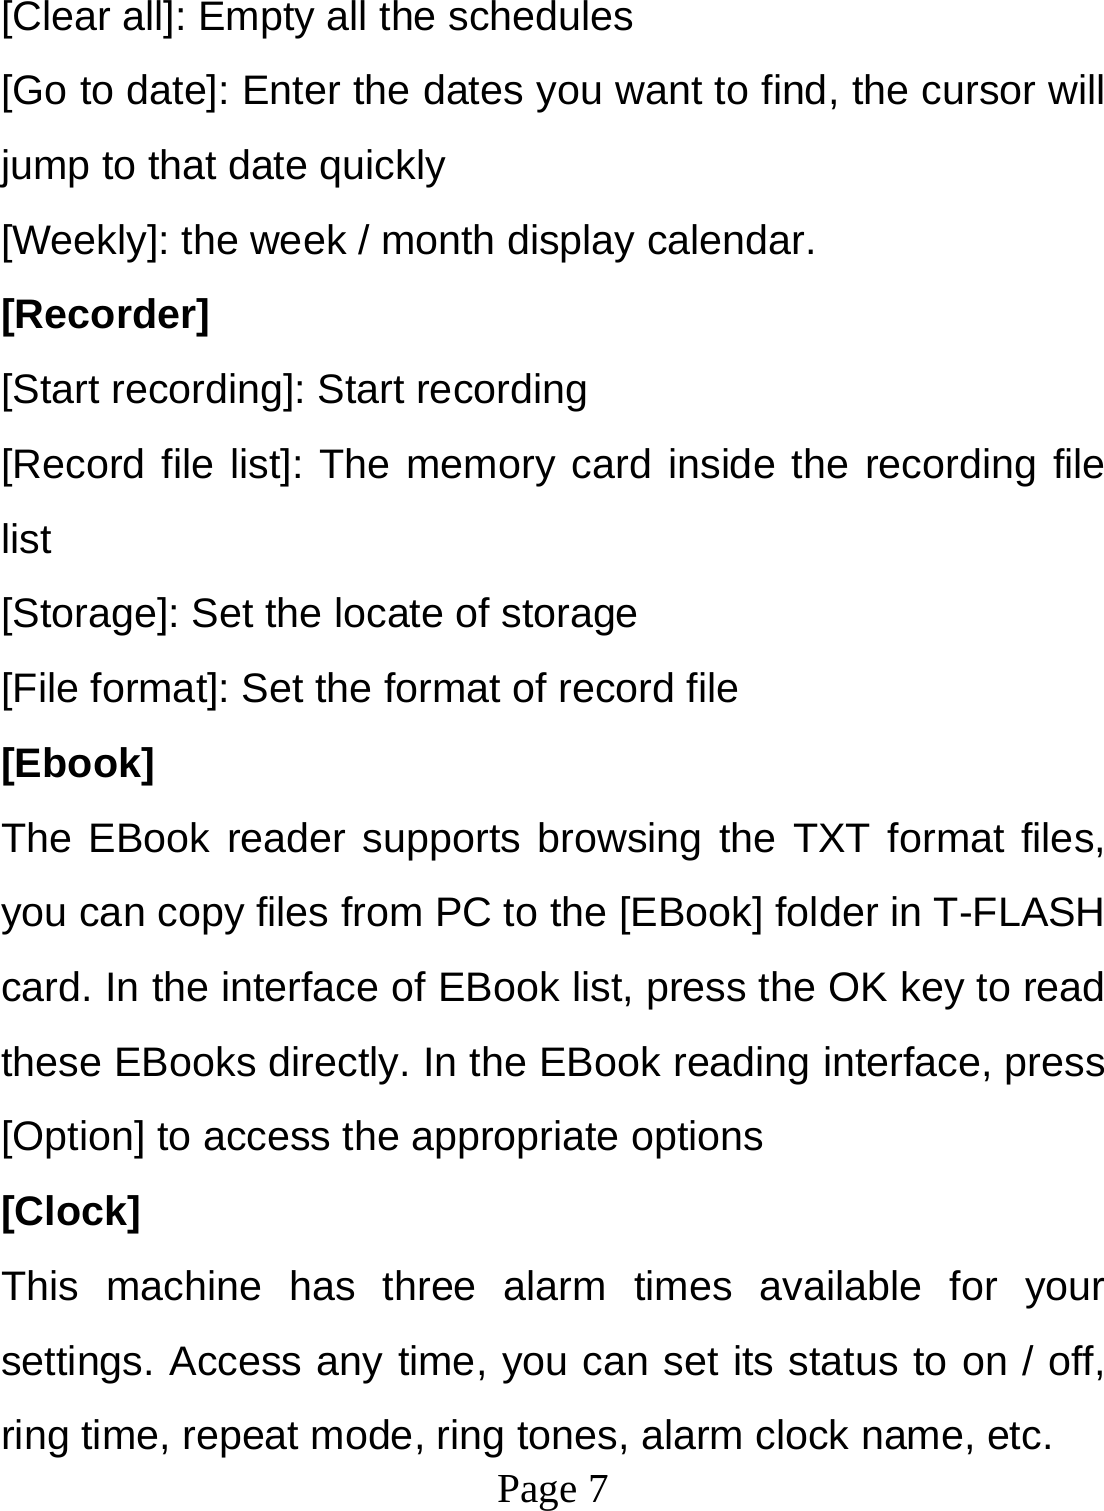  Page 7  [Clear all]: Empty all the schedules [Go to date]: Enter the dates you want to find, the cursor will jump to that date quickly [Weekly]: the week / month display calendar. [Recorder] [Start recording]: Start recording [Record file list]: The memory card inside the recording file list [Storage]: Set the locate of storage [File format]: Set the format of record file [Ebook] The EBook reader supports browsing the TXT format files, you can copy files from PC to the [EBook] folder in T-FLASH card. In the interface of EBook list, press the OK key to read these EBooks directly. In the EBook reading interface, press [Option] to access the appropriate options [Clock] This machine has three alarm times available for your settings. Access any time, you can set its status to on / off, ring time, repeat mode, ring tones, alarm clock name, etc. 